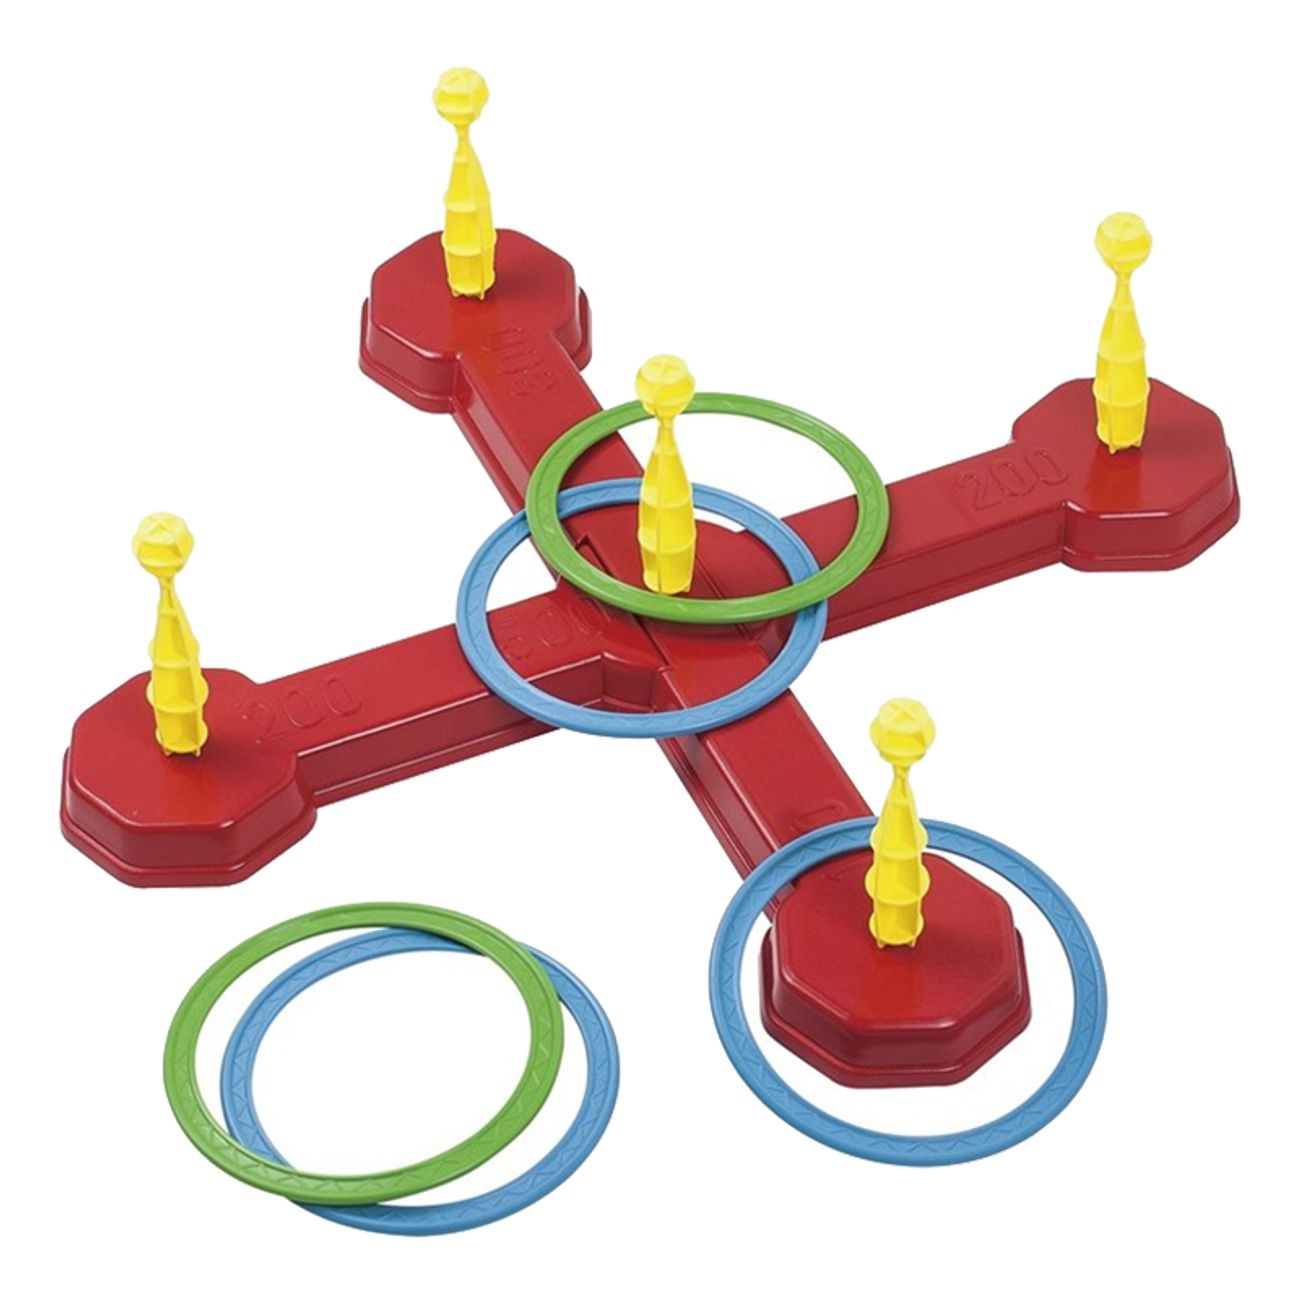 ring-toss-game-74013-1